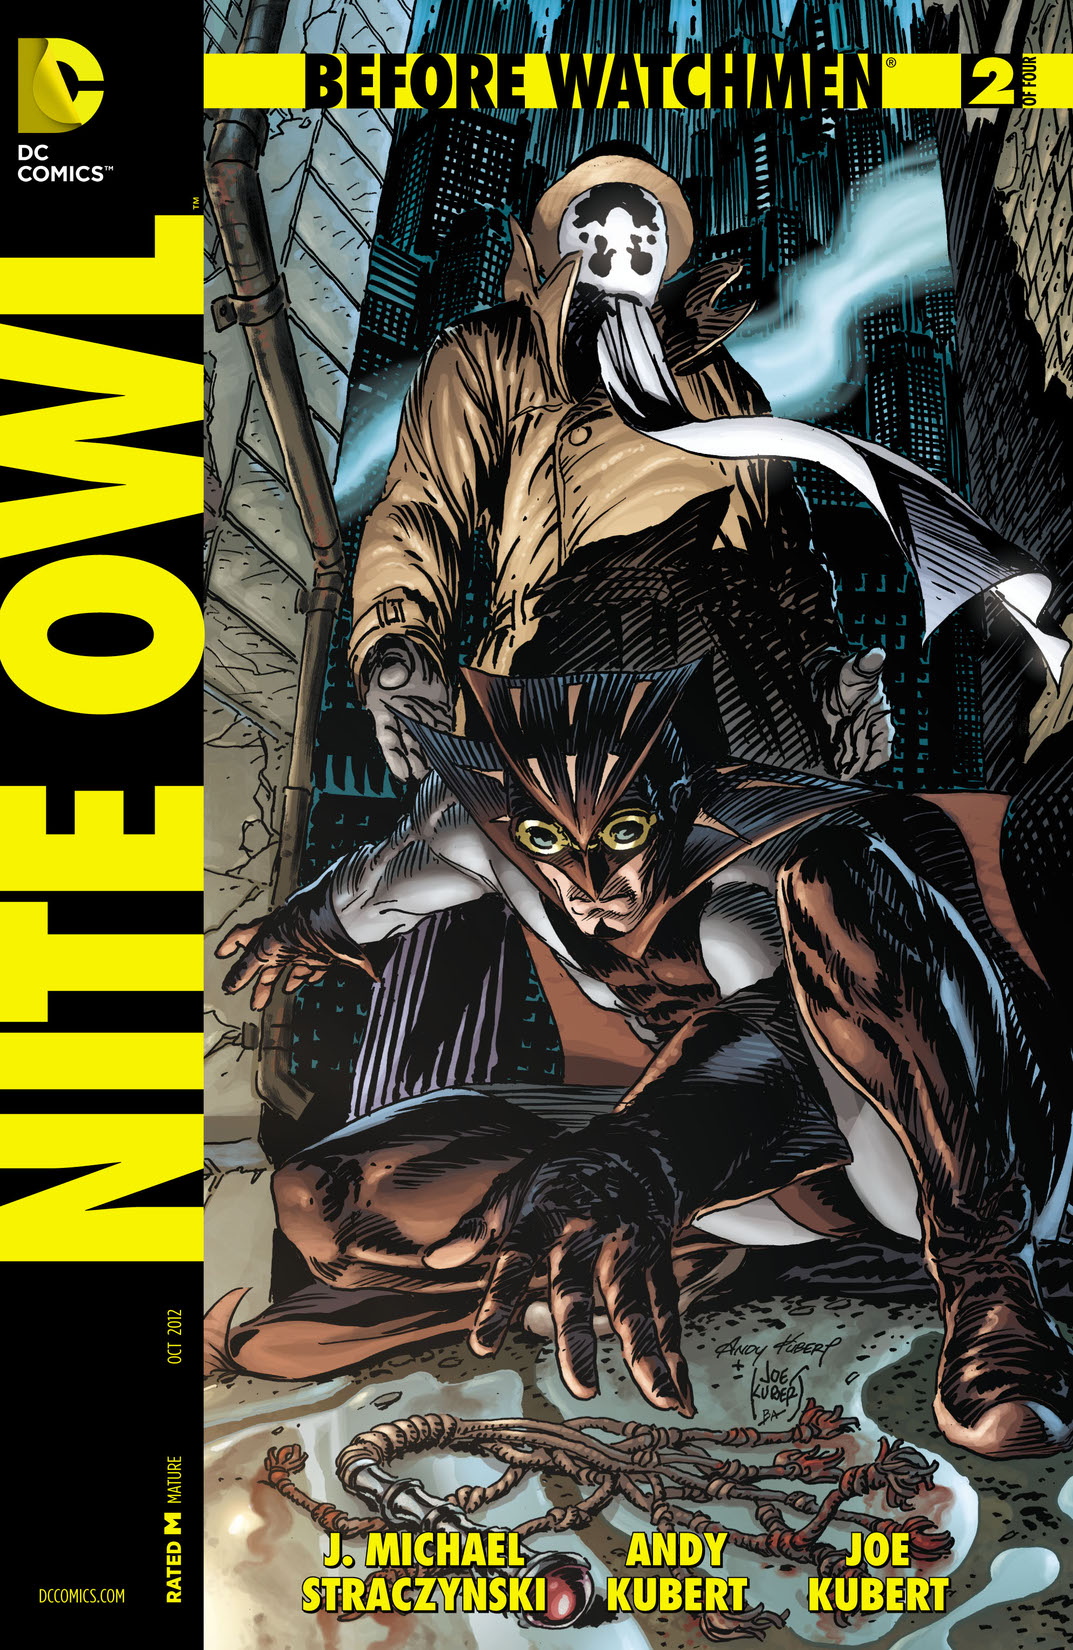 Before Watchmen: Nite Owl #2 preview images